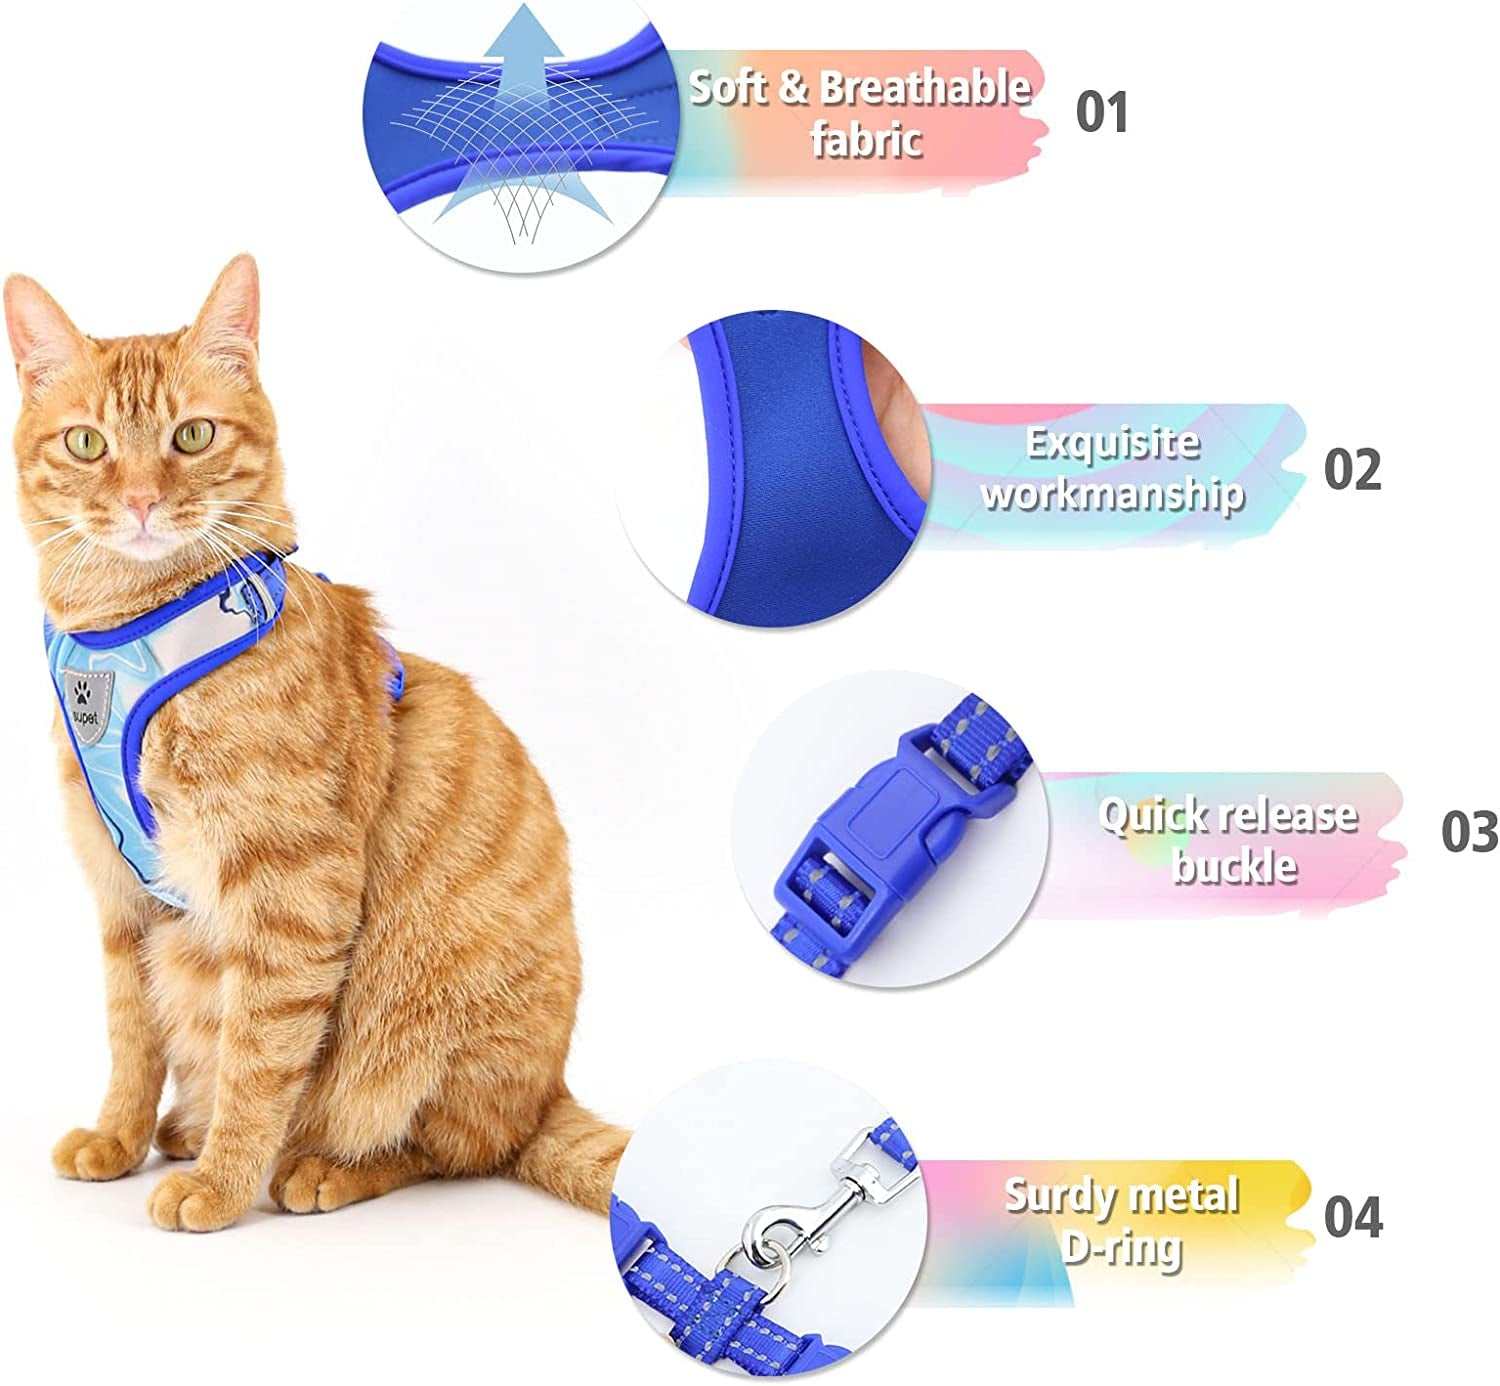 Cat Harness and Leash Escape Proof, Adjustable Breathable Cat Vest Harness with Reflective Trim, Cat Leash and Harness Set for Large Small Cats Kittens Puppies